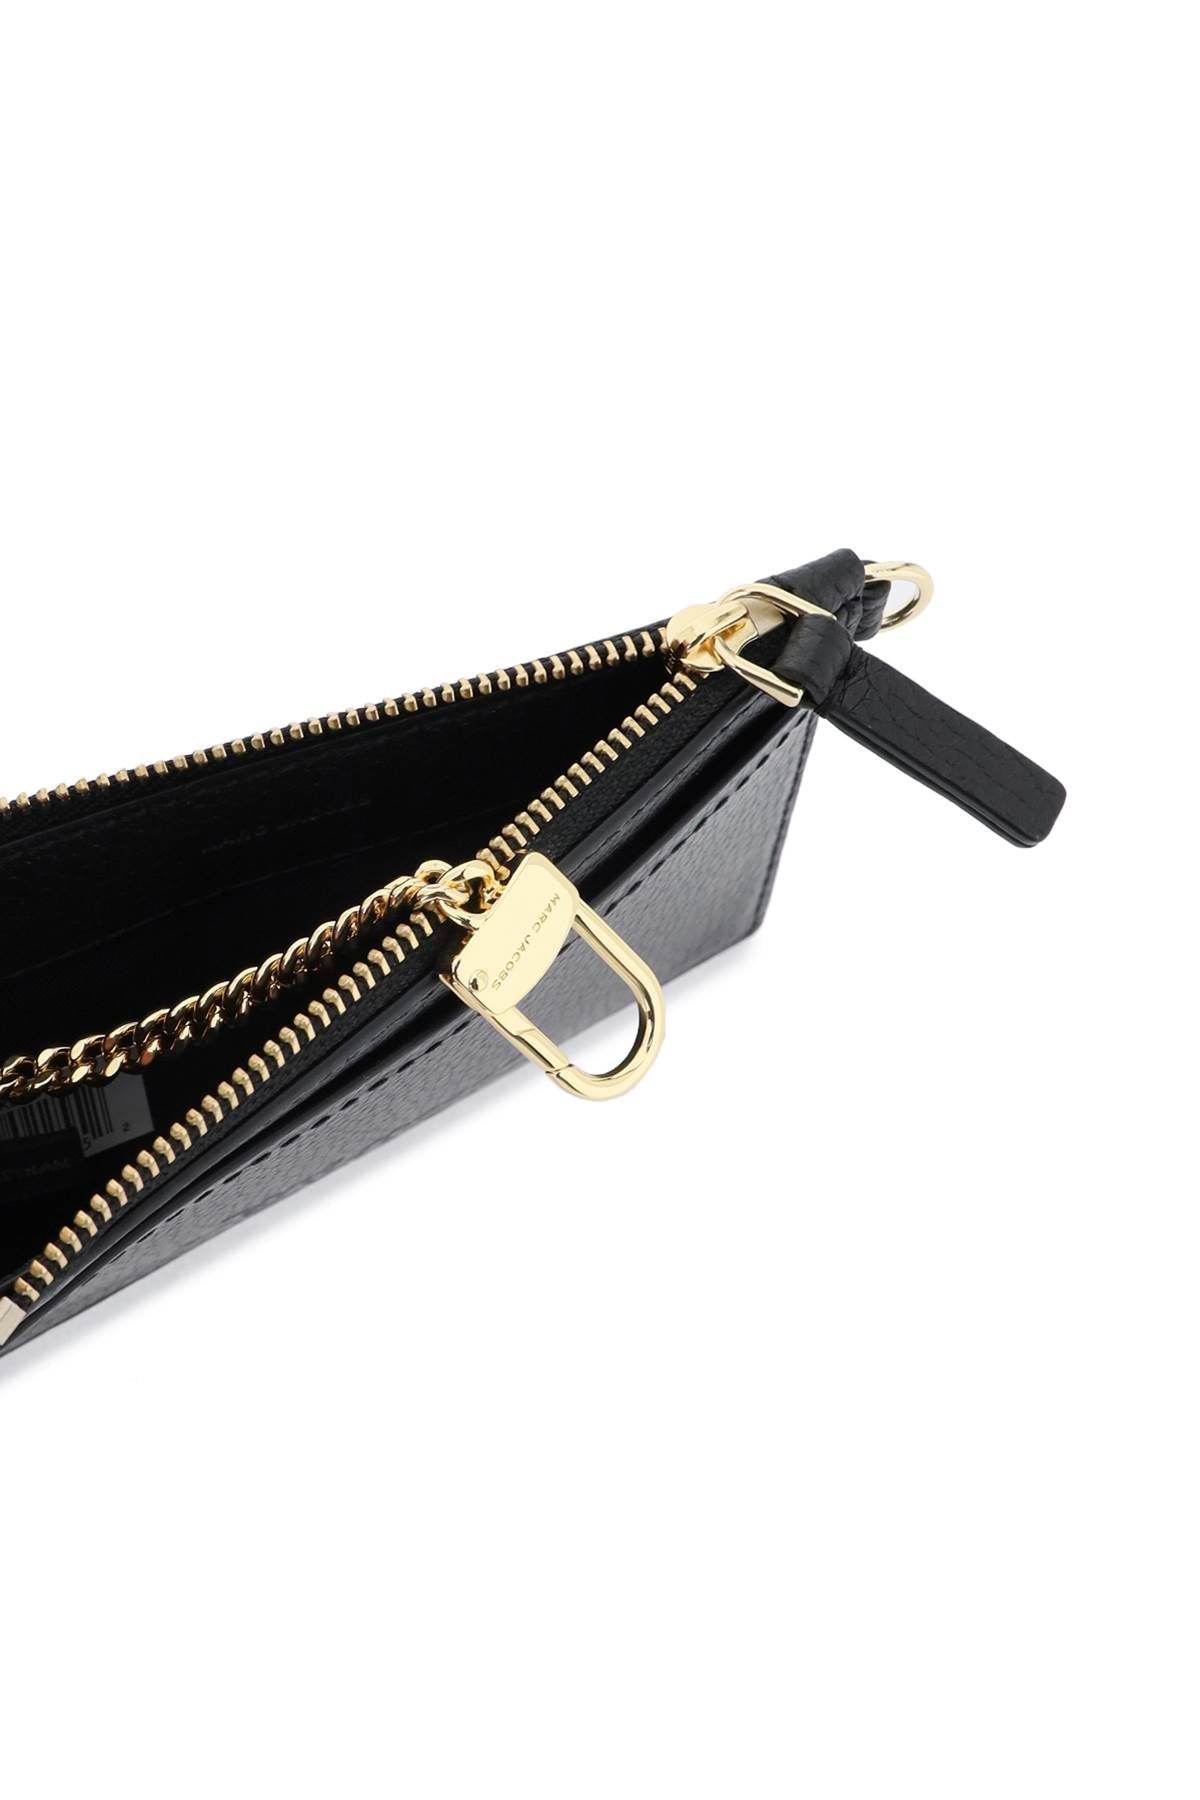 Marc jacobs the leather top zip wristlet-1